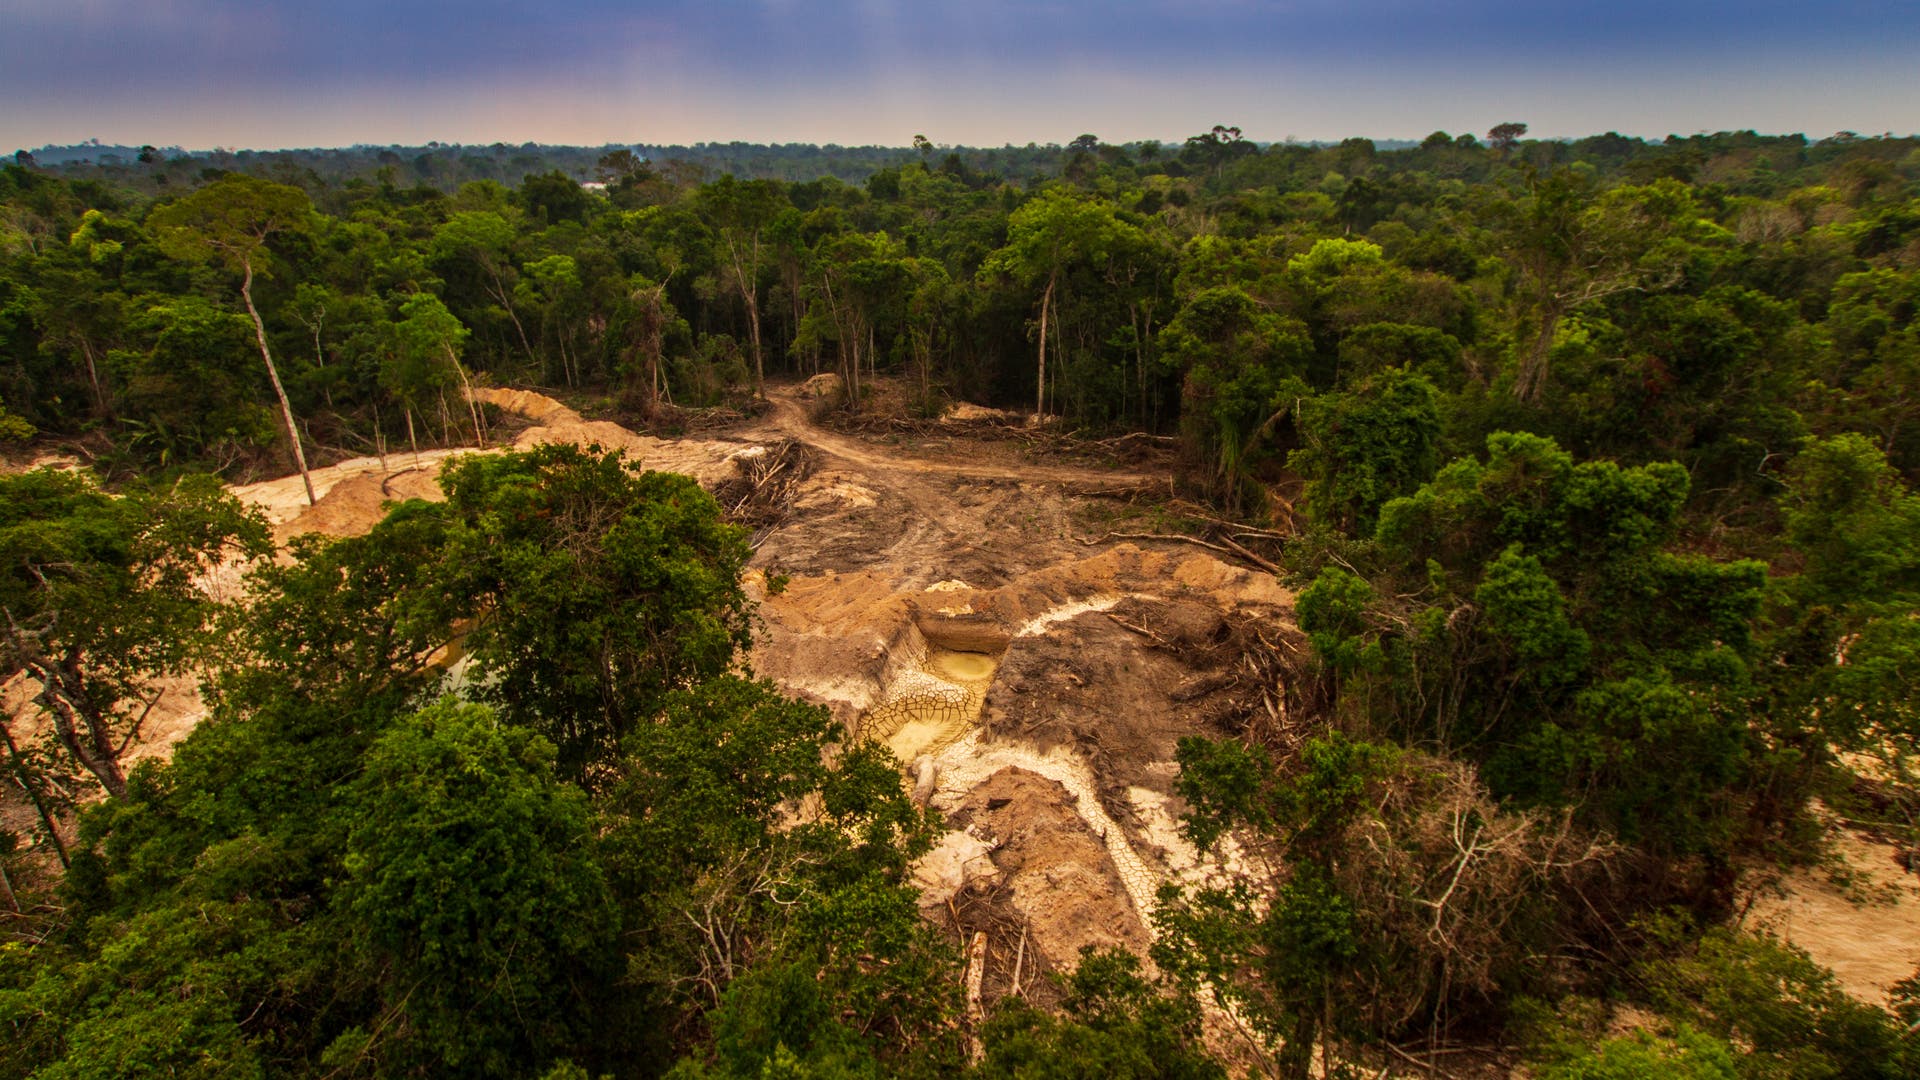 Deforestation: the per capita forest area has decreased significantly